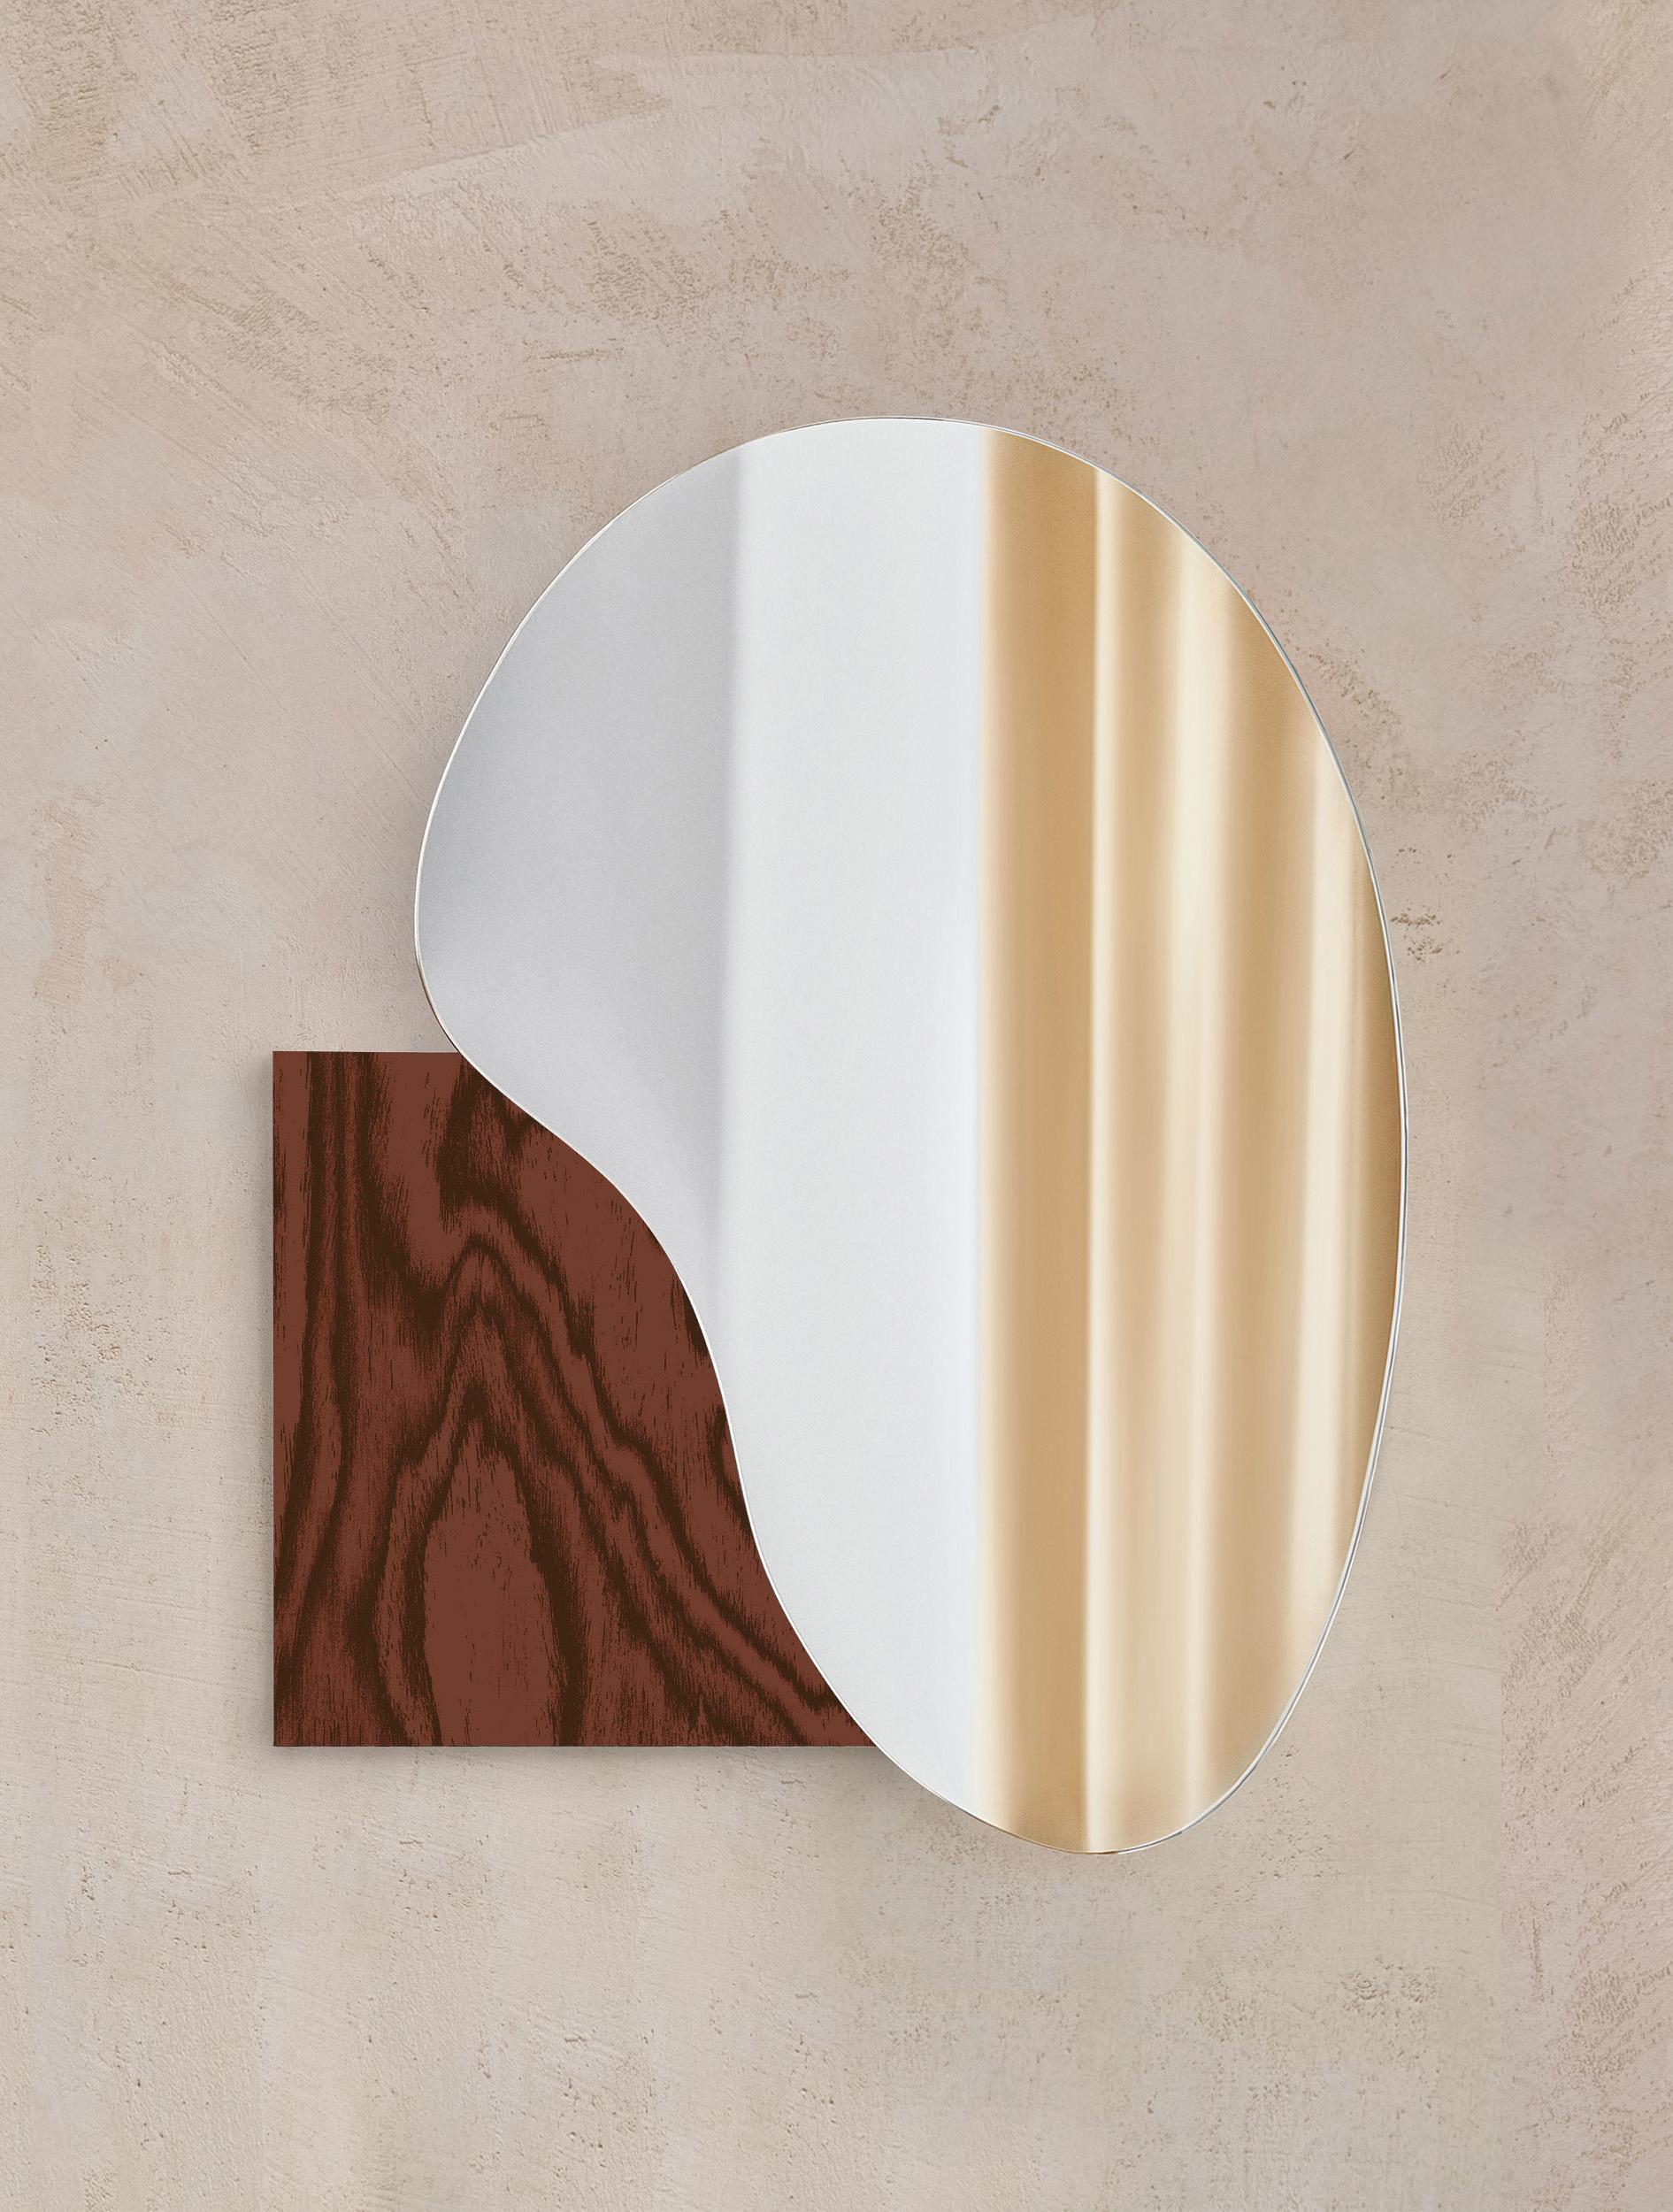 Brand: NOOM
Designers: Maryna Dague & Nathan Baraness.

Type of Mirrors: Optiwhite, Black tint mirror, Copper tint mirror.
Materials for base: Veneered wood, Madrona wood veneer, Burned steel, Stainless steel / Hand brushed stainless steel, Brushed